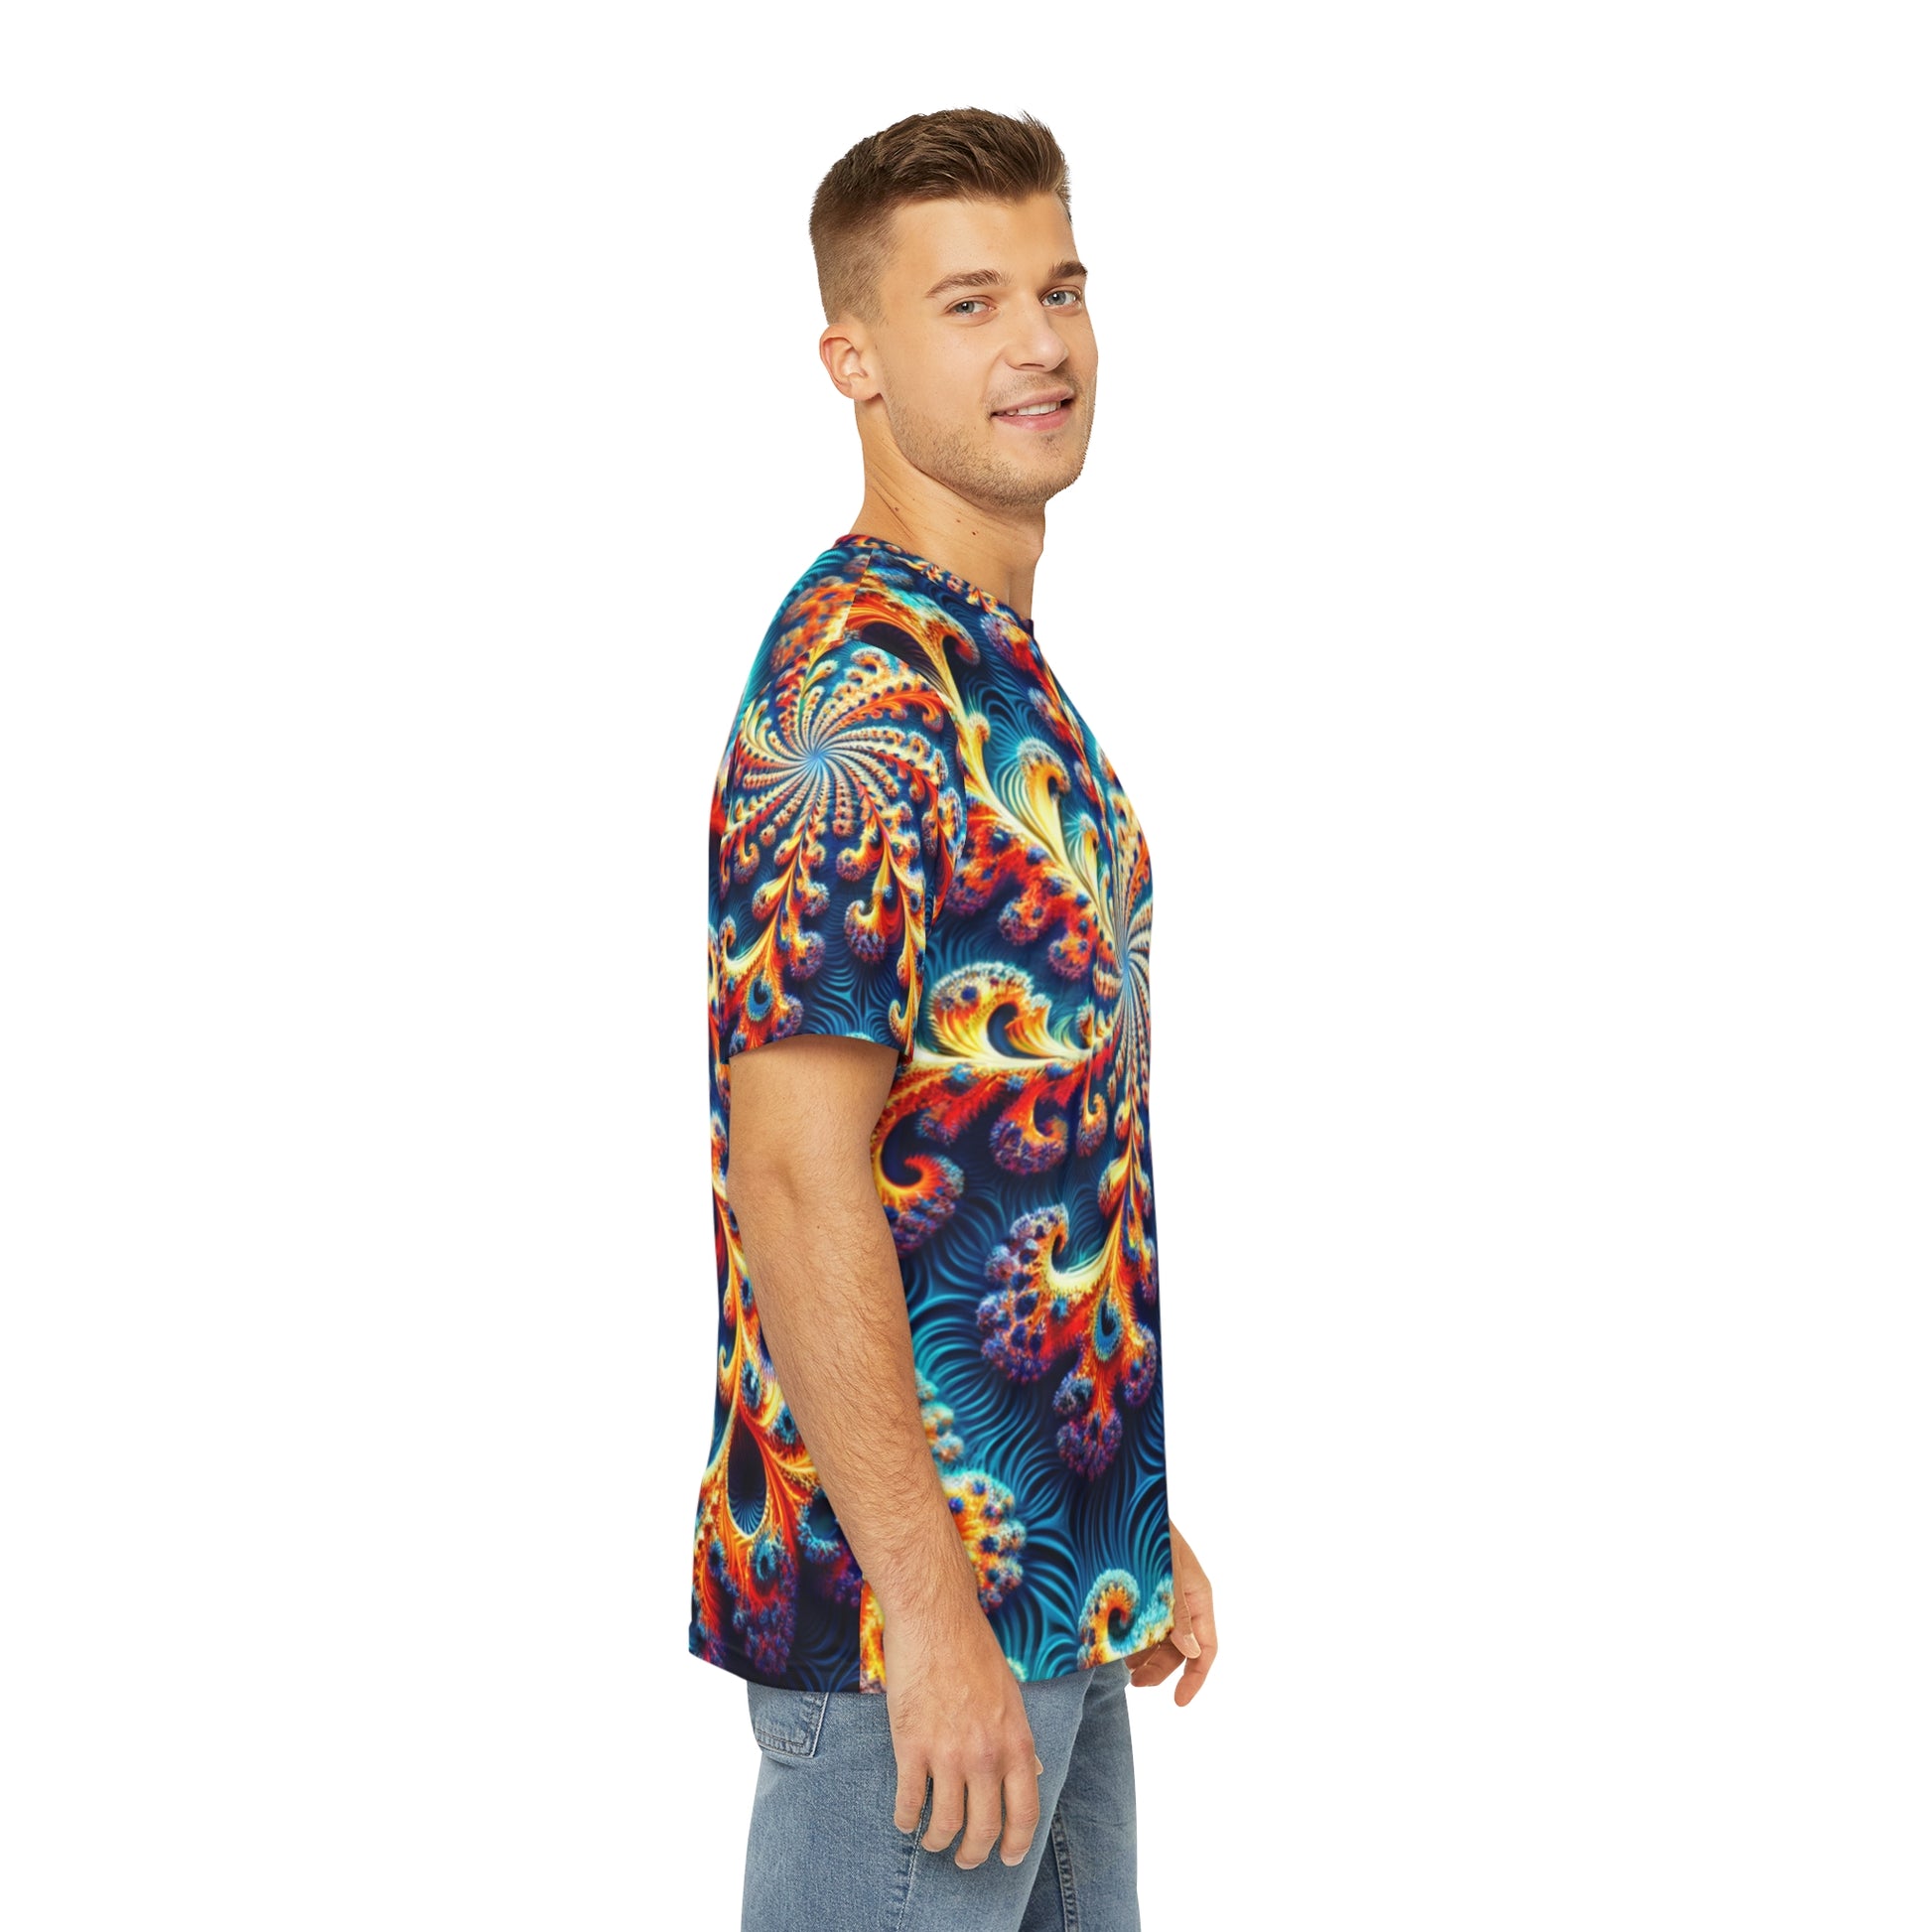 Back view of the Iridescent Nautilus Swirls Crewneck Pullover All-Over Print Short-Sleeved Shirt blue red yellow orange green swirl pattern paired with casual denim pants worn by a white man